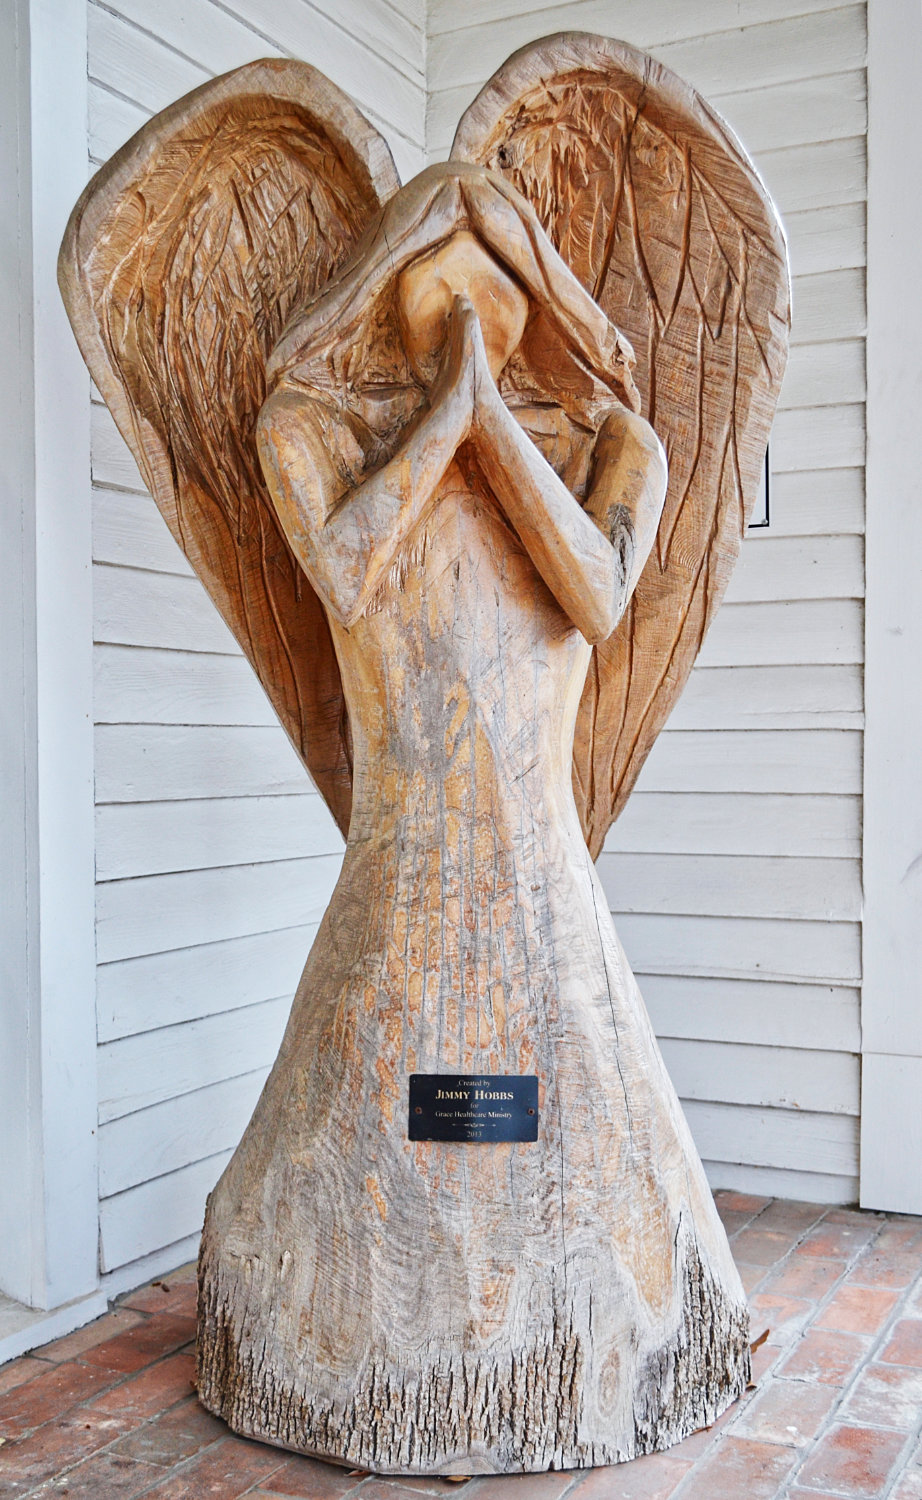 A wood carving of a praying angel adorns the front porch of the Grace Healthcare Ministry. It was created by Jimmy Hobbs in 2013.